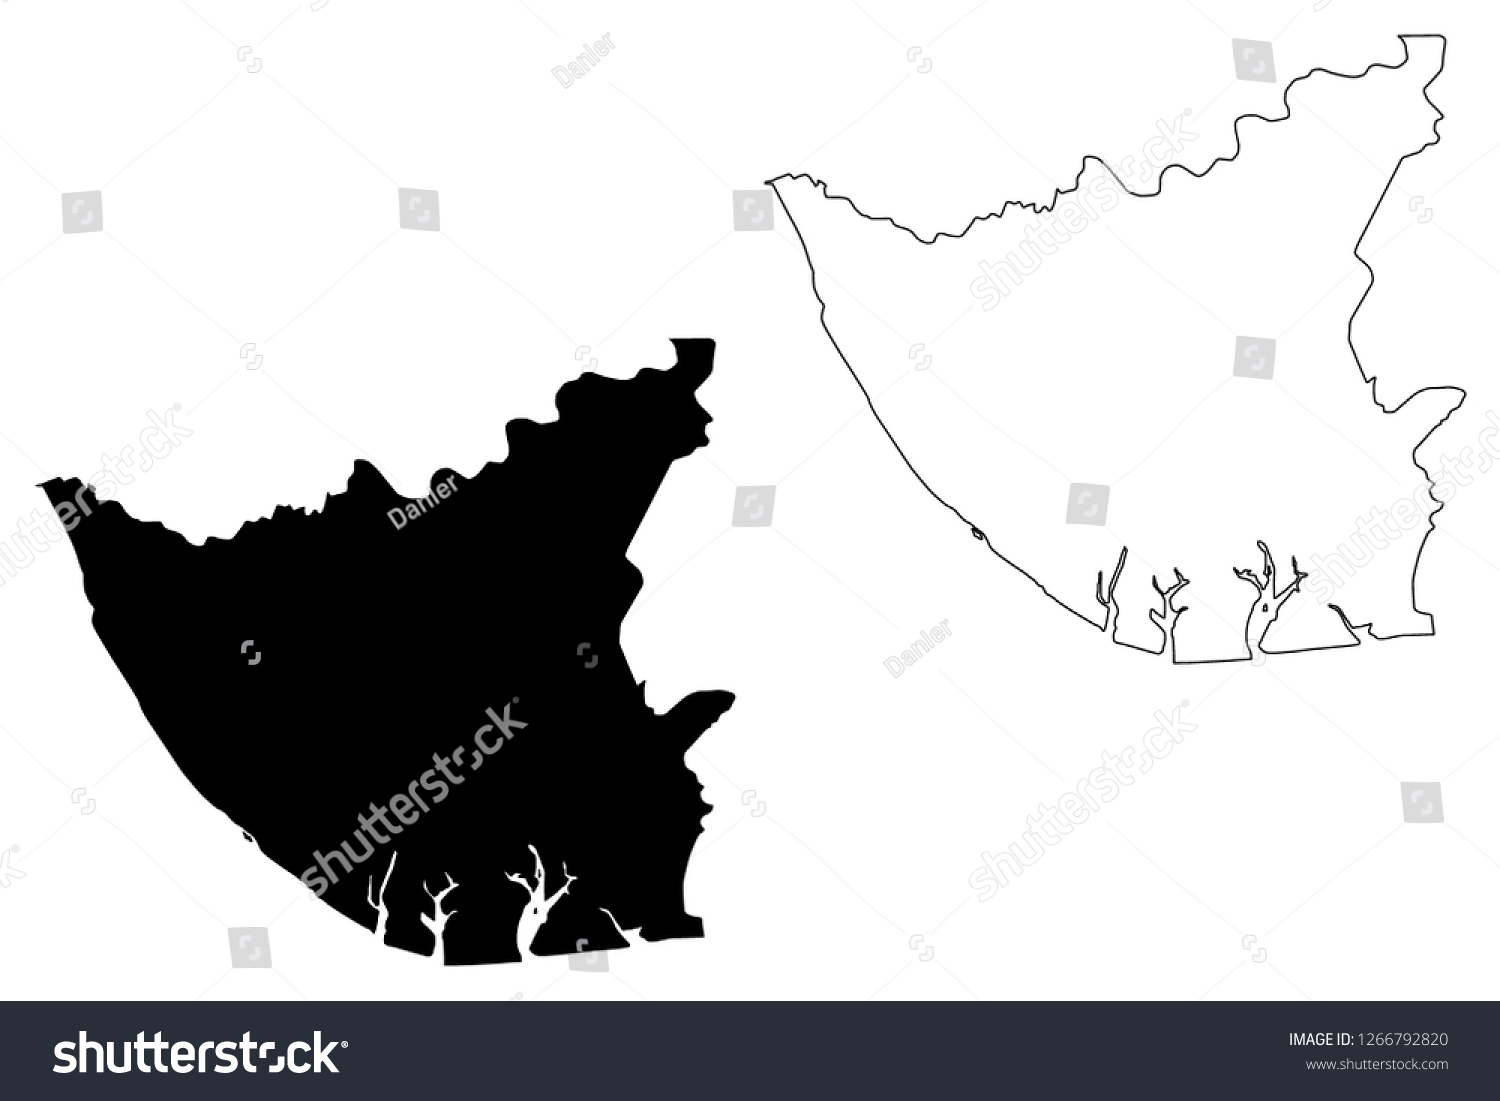 Stock Vector Bayelsa State Subdivisions Of Nigeria Federated State Of Nigeria Map Vector Illustration 1266792820 